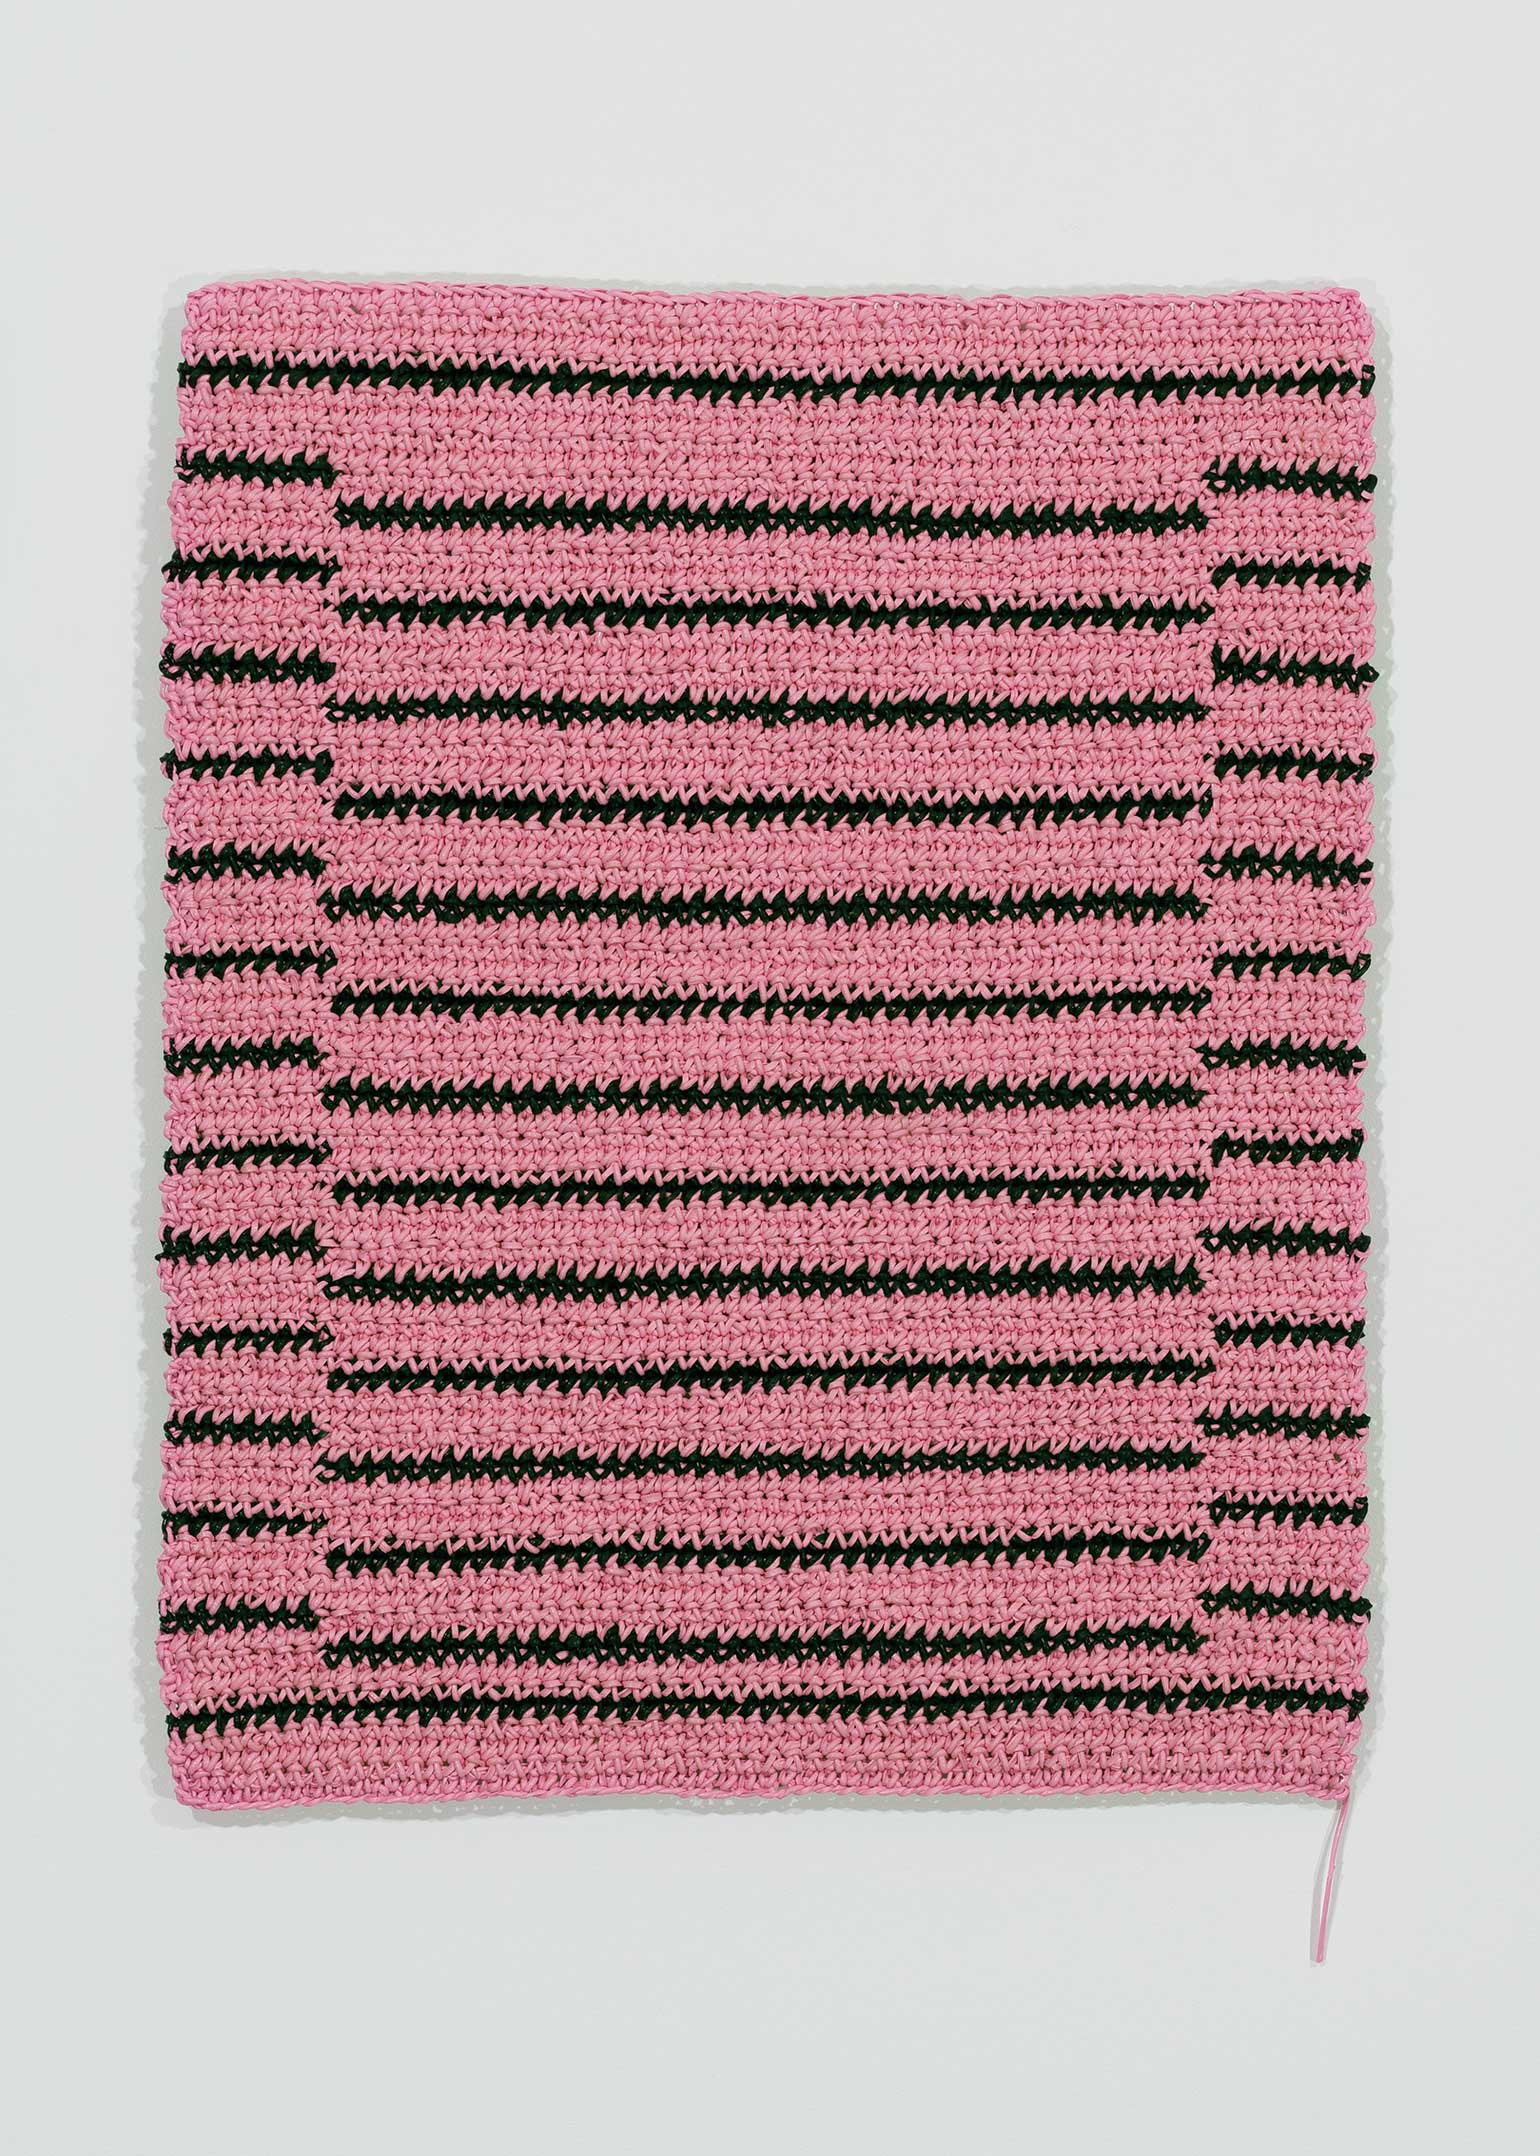 Angela Teng - Line Dance (Pink and Black for Mary Heilmann), 2016